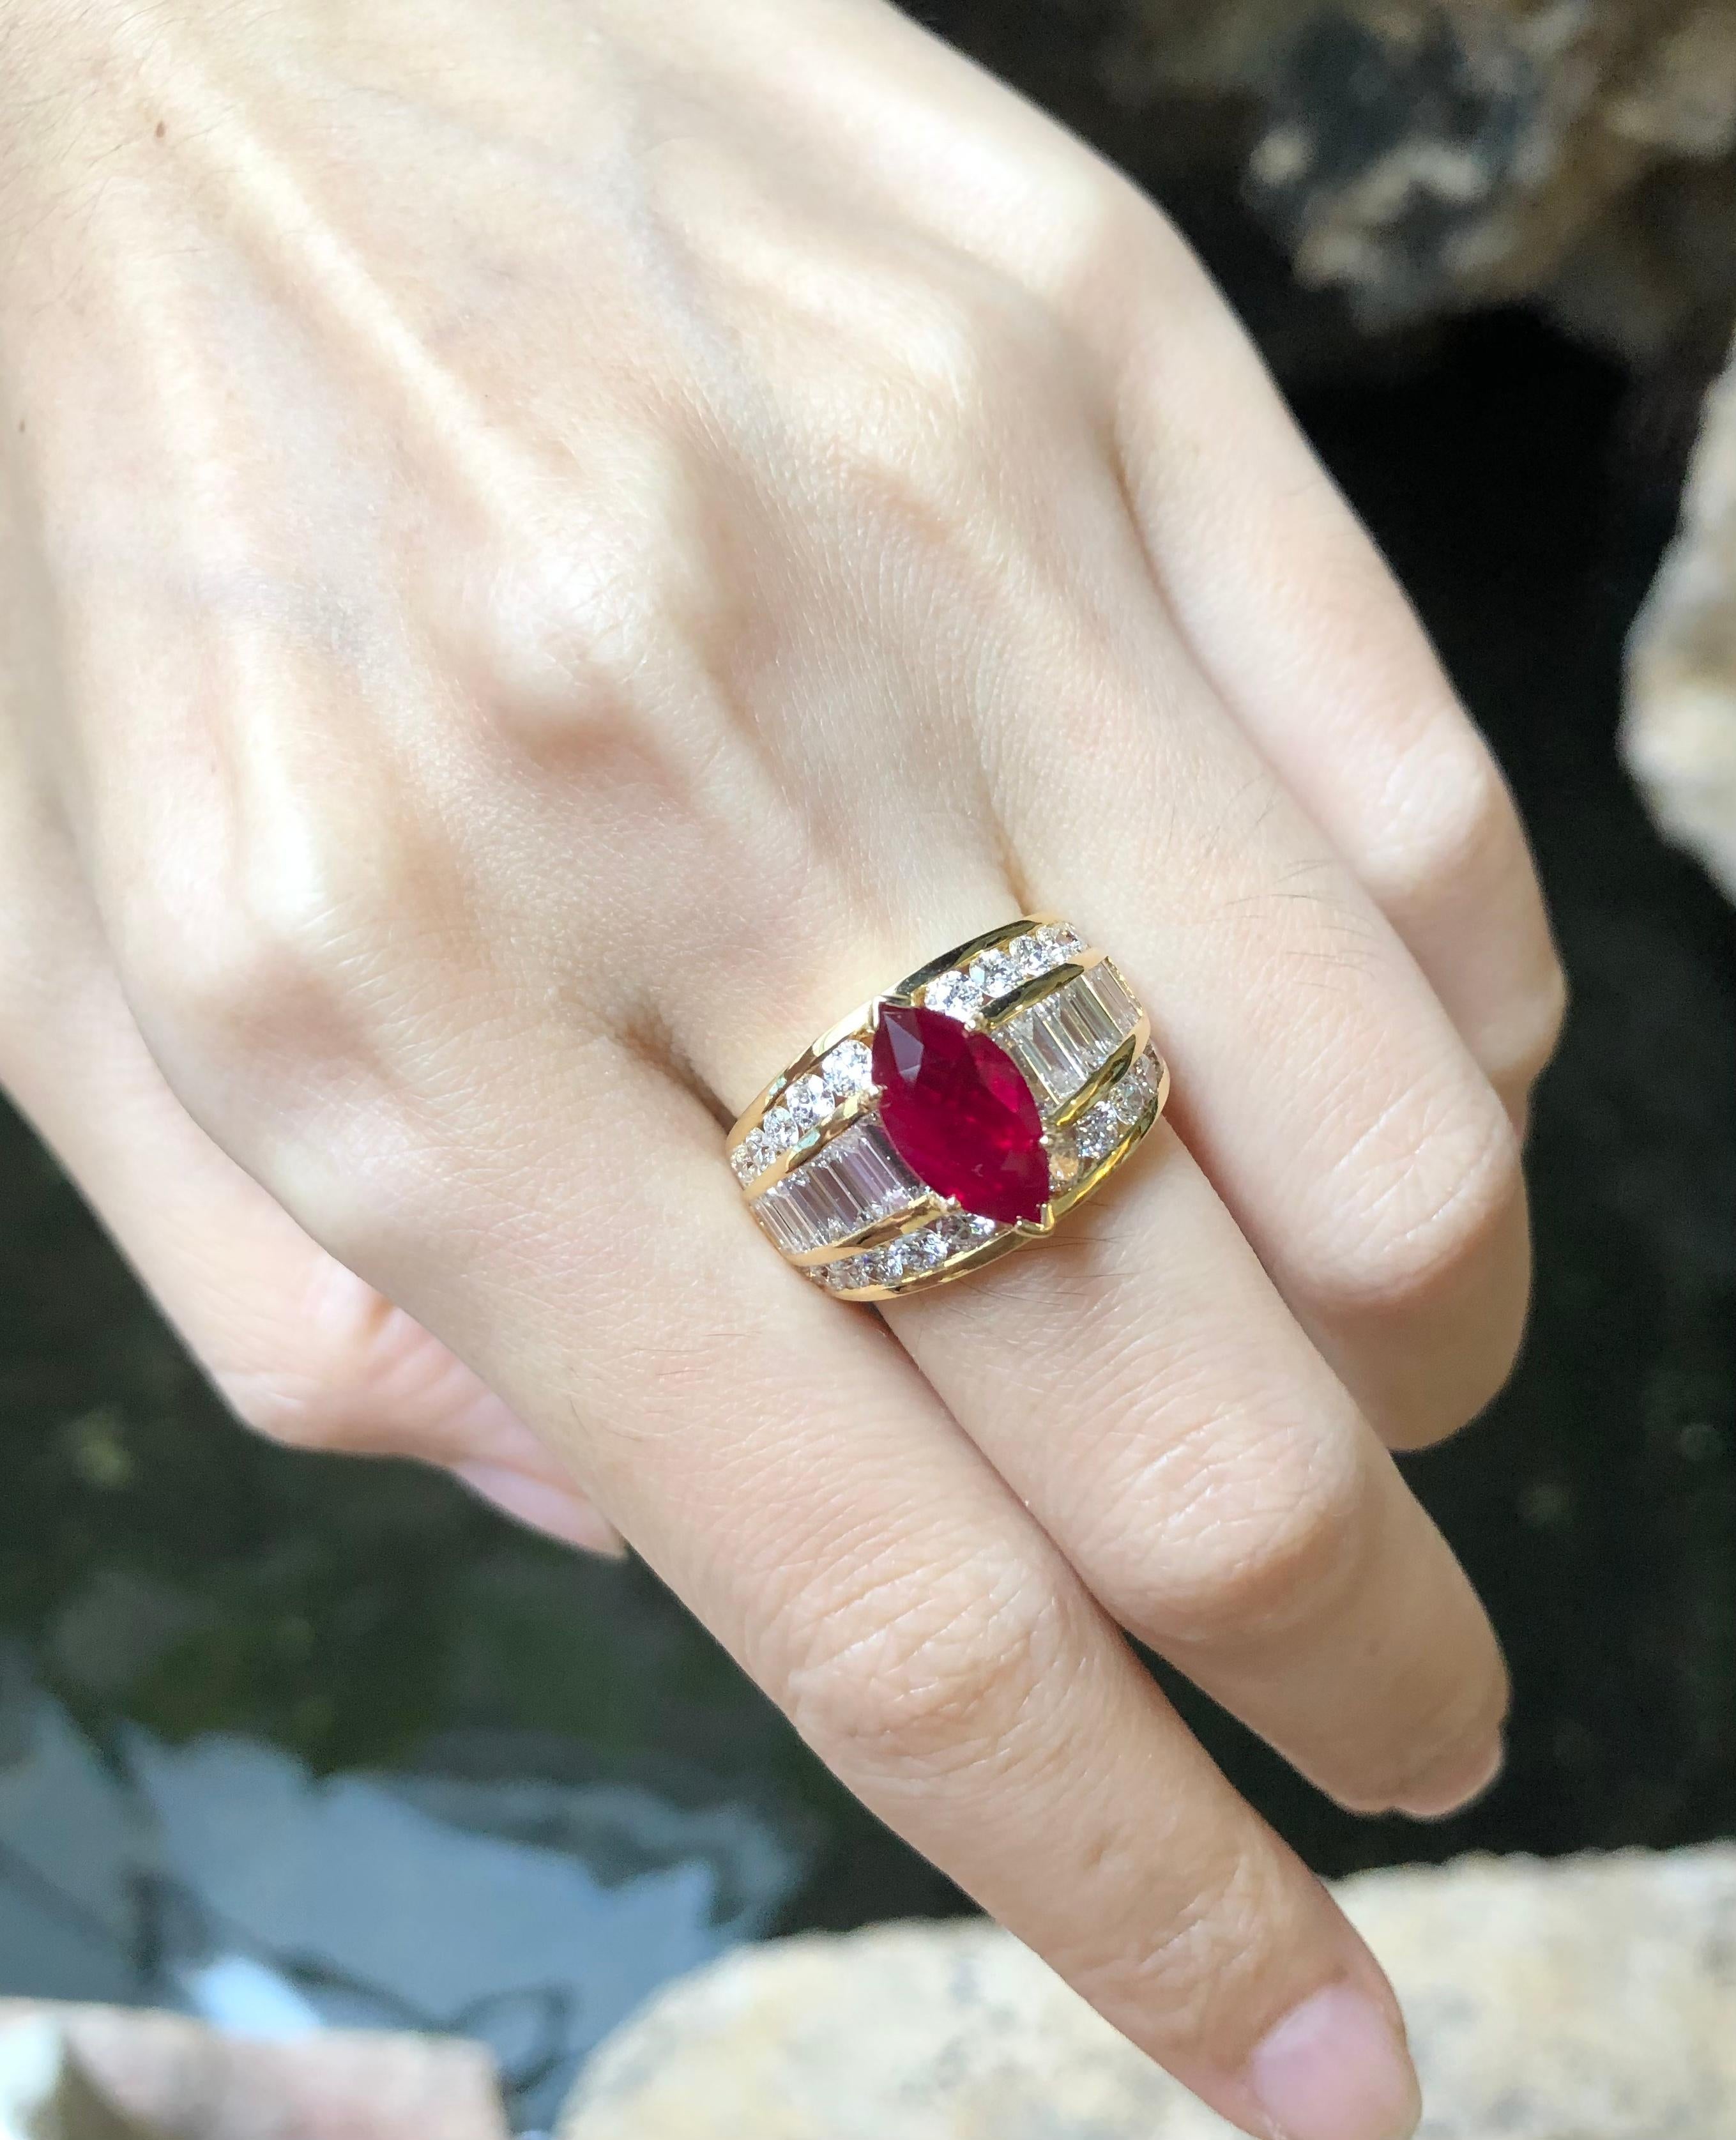 Ruby 2.71 carats with Diamond 2.59 carats Ring set in 18 Karat Gold Settings

Width:  0.6 cm 
Length: 1.4 cm
Ring Size: 54
Total Weight: 10.76 grams

